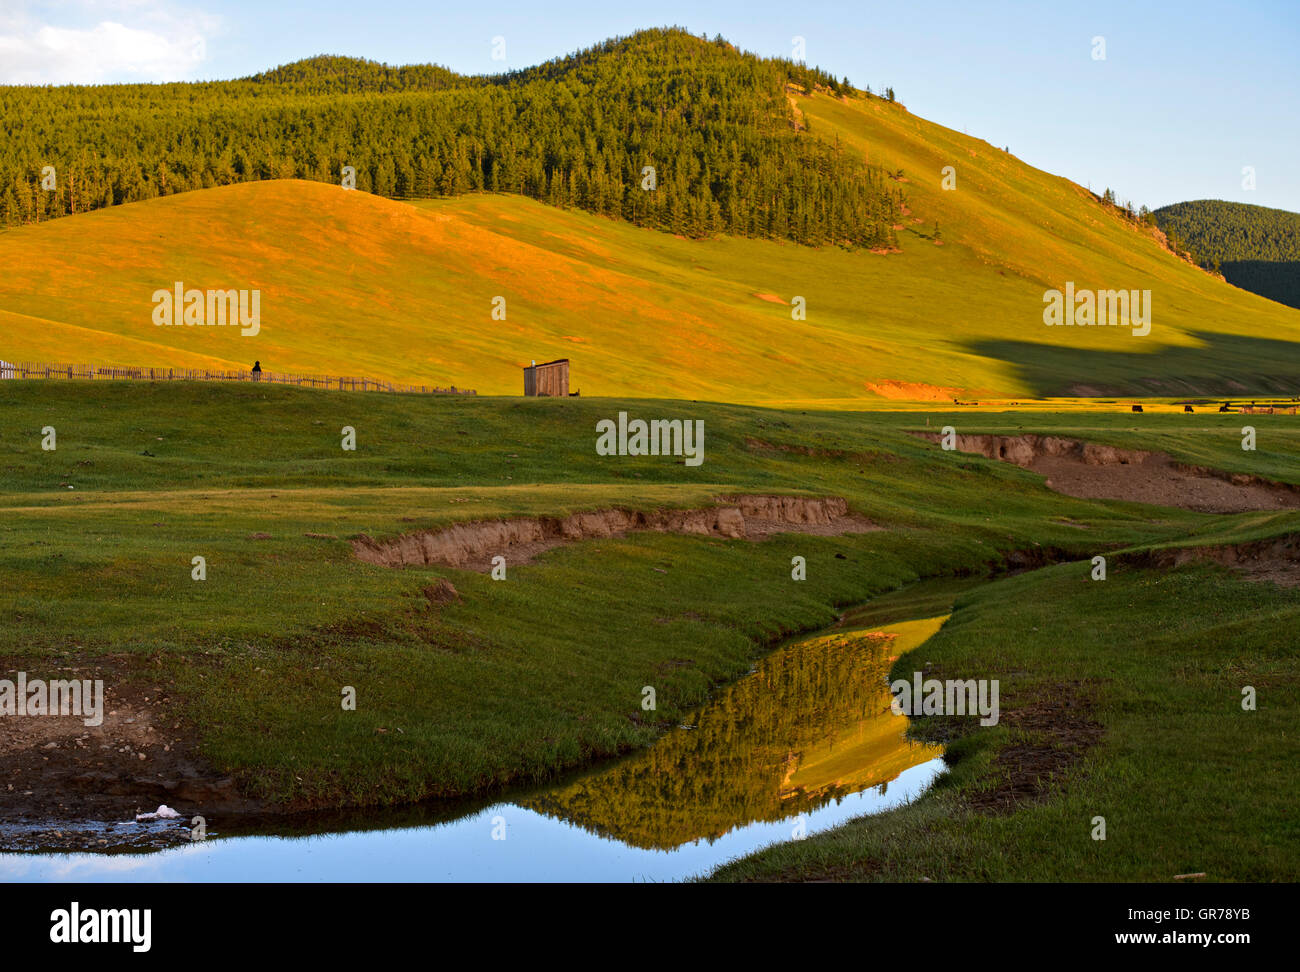 Hilly Landscape In The Orkhon Valley, Mongolia Stock Photo